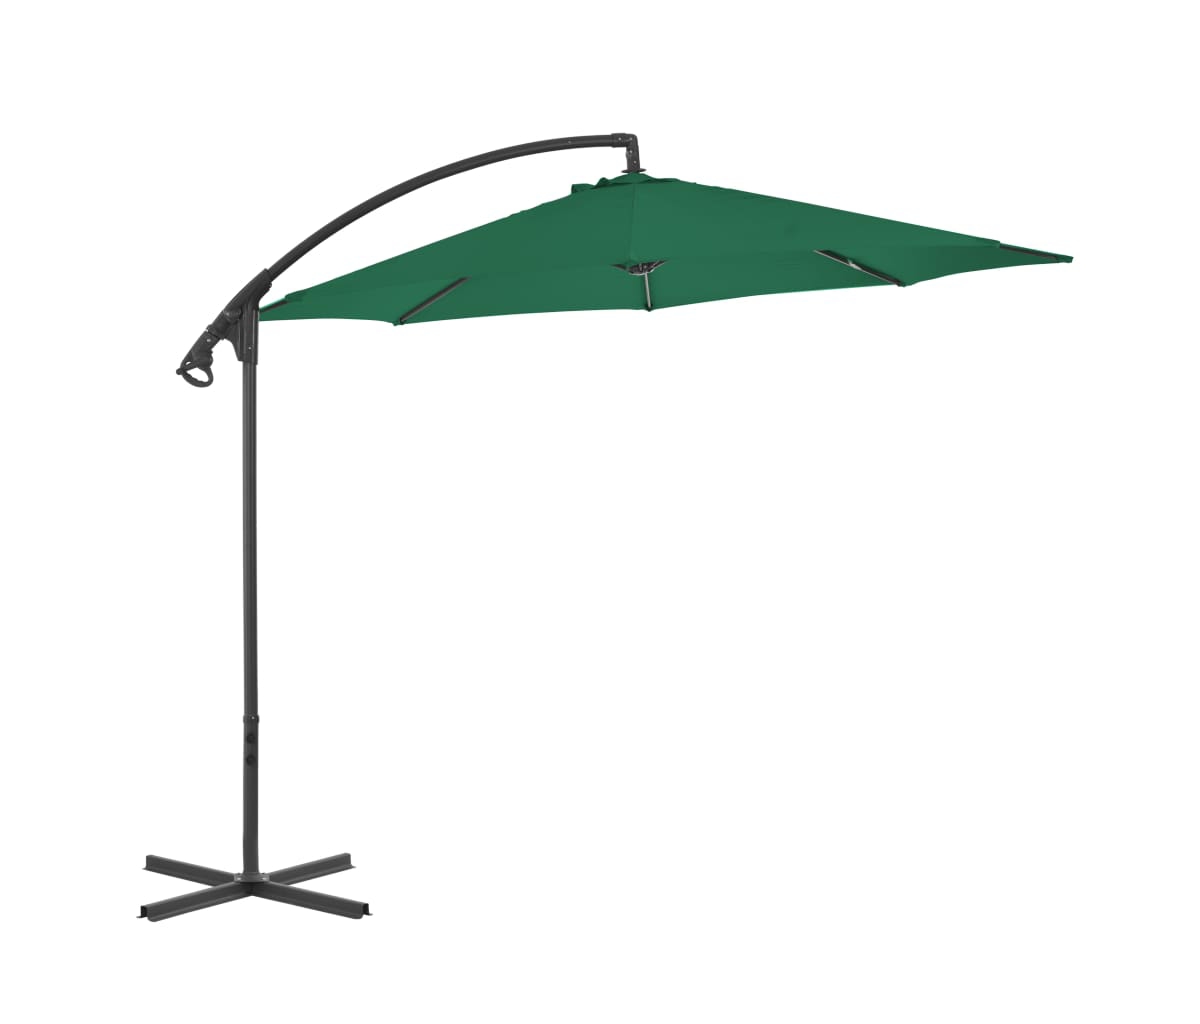 Cantilever Umbrella with Steel Pole 118.1" Green - Green